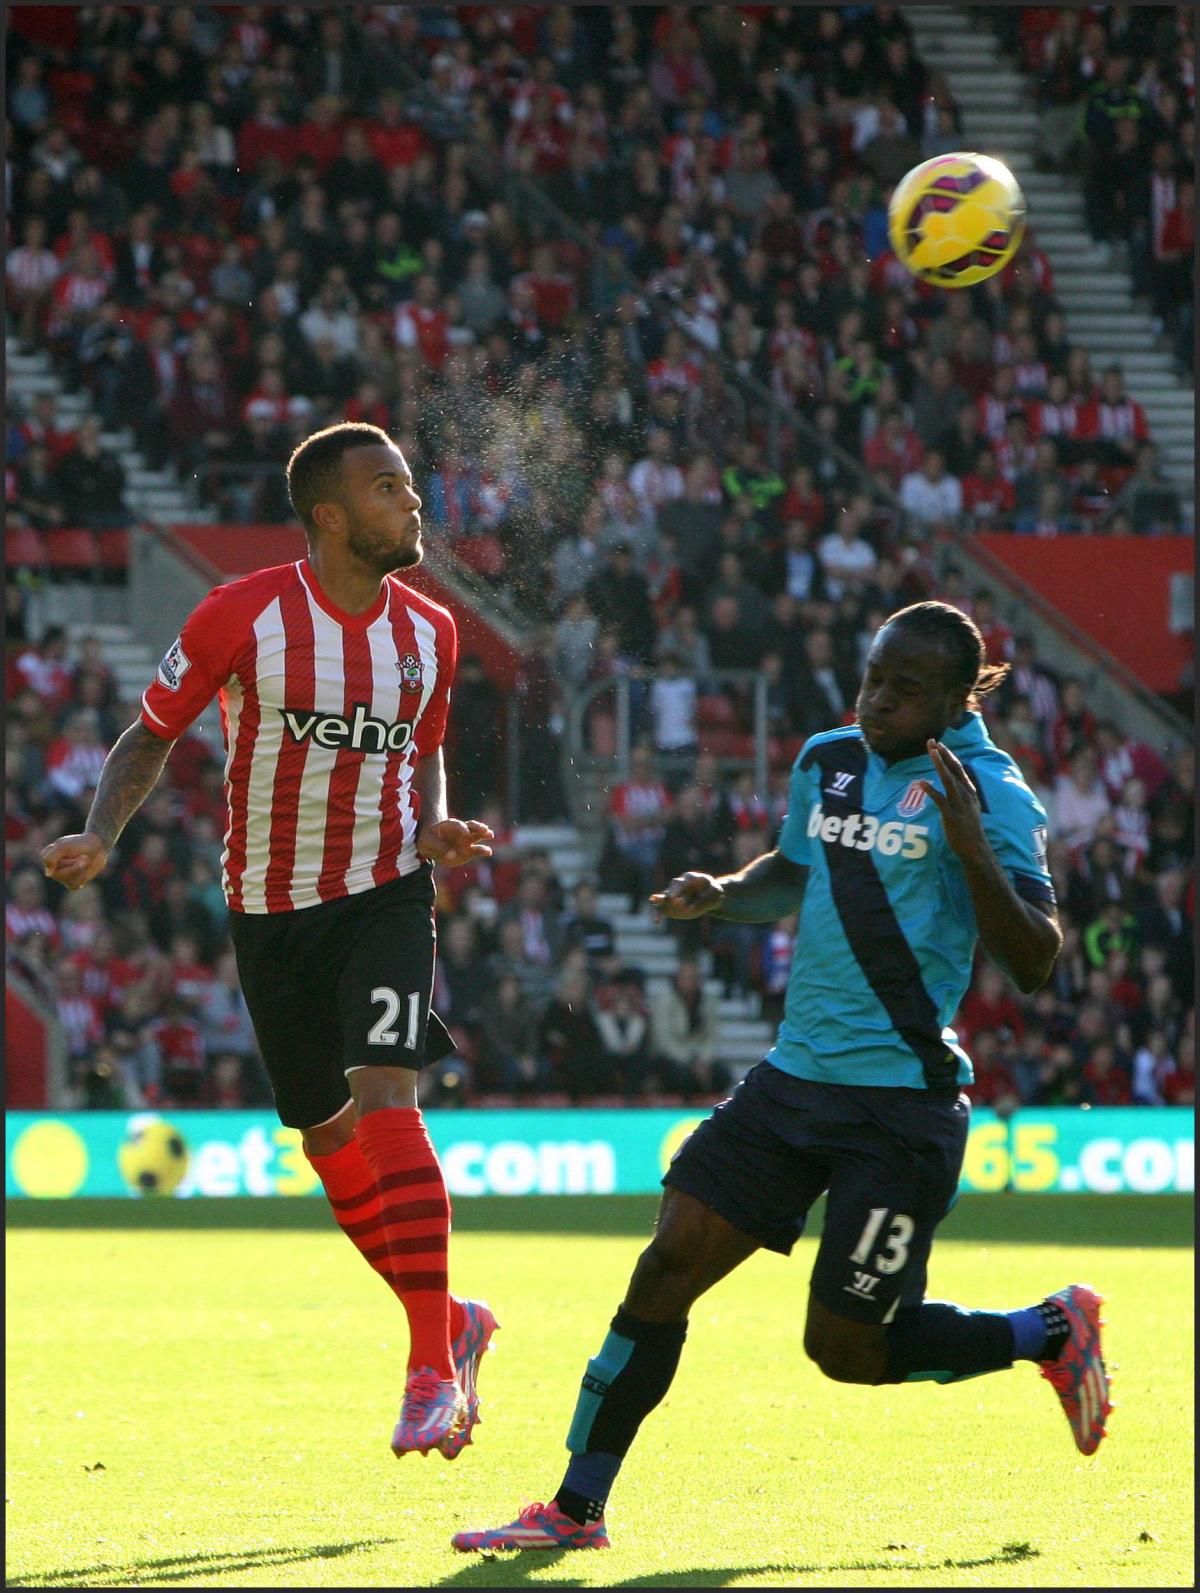 Pictures from Saints v Stoke at St Mary's Stadium. The unauthorised downloading, editing, copying, or distribution of this image is strictly prohibited.